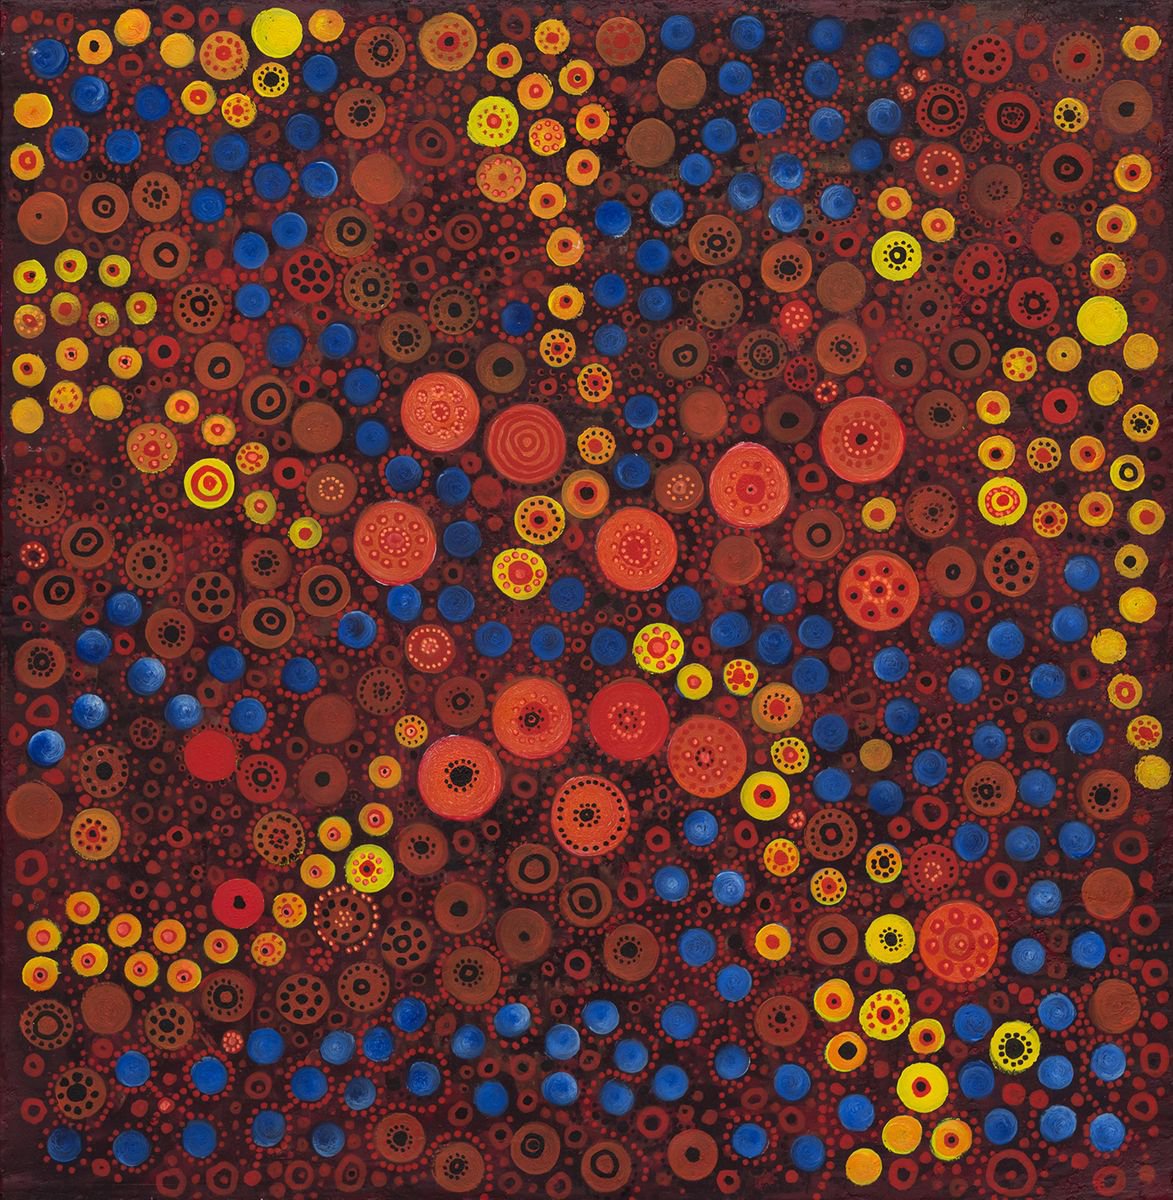 Universe No.1 - Abstract Dot Painting by Peter Zelei